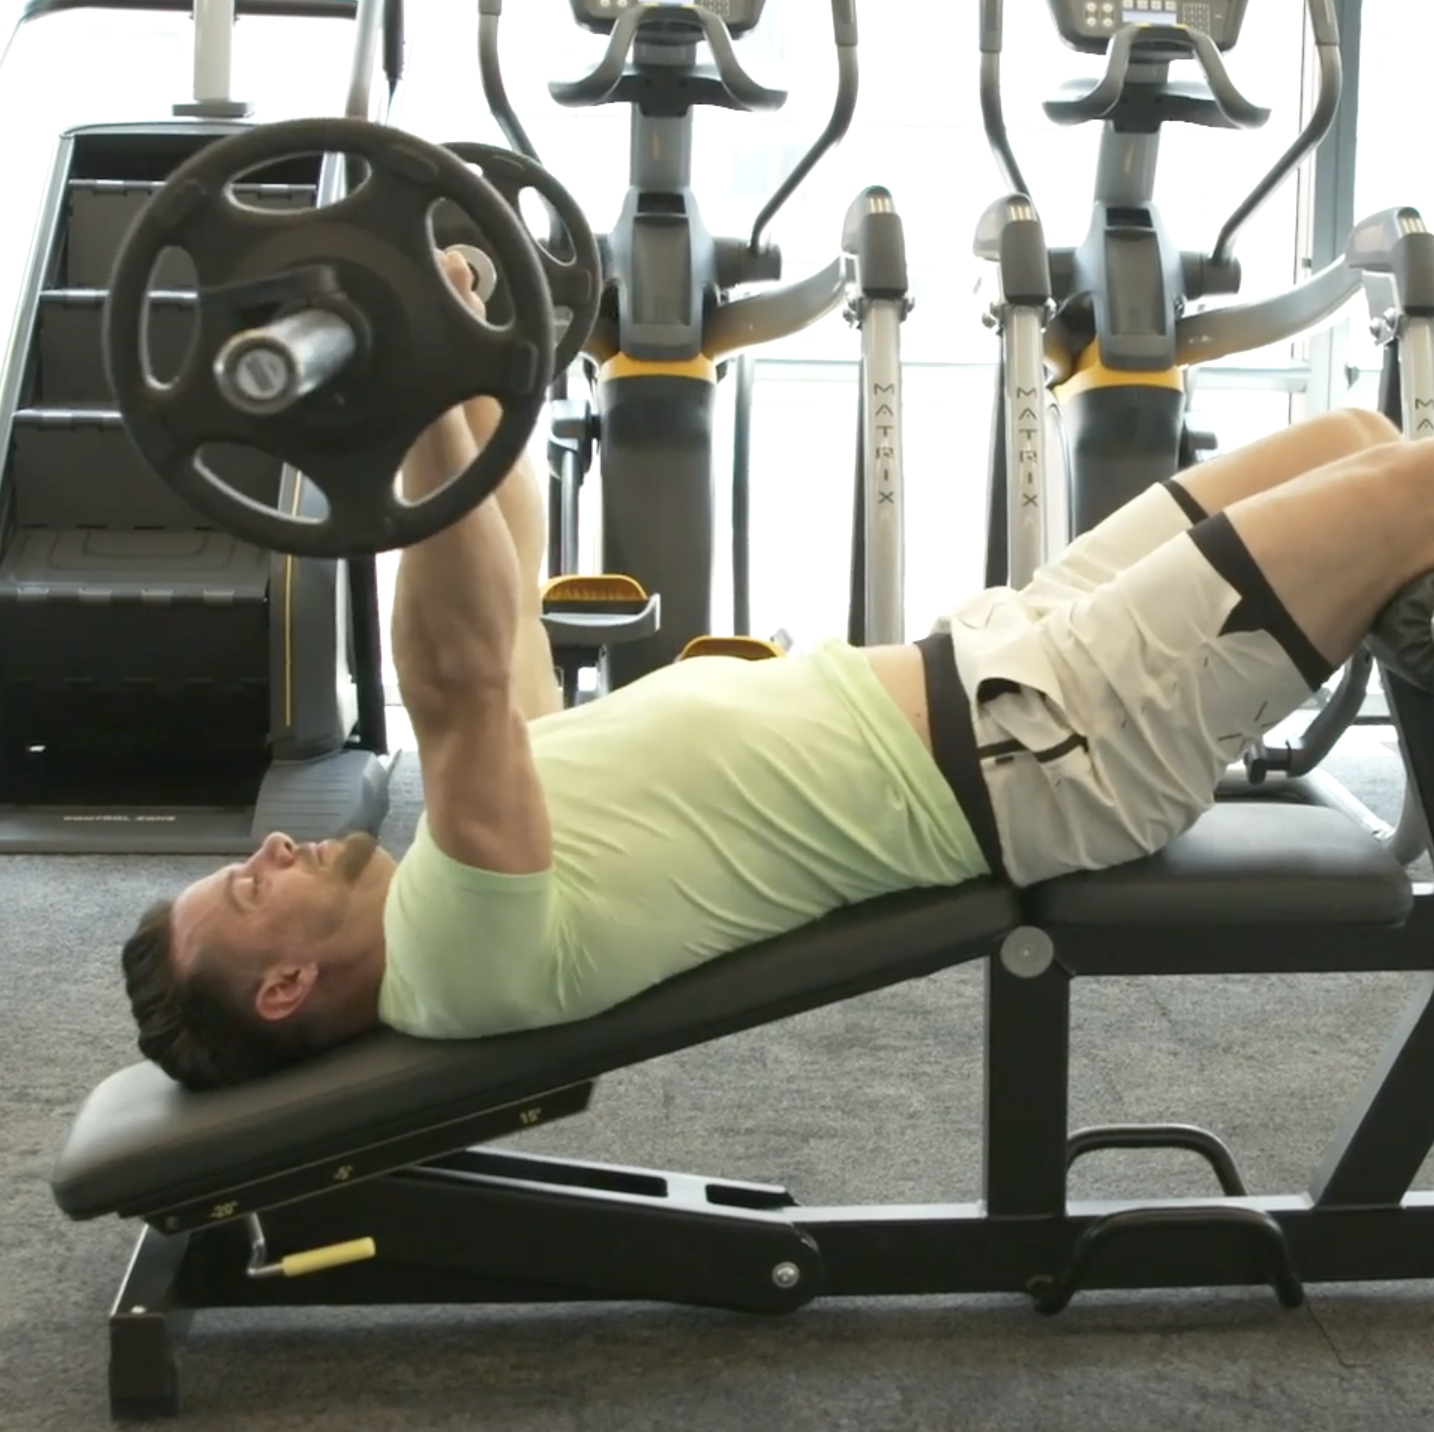 Stop Doing the Decline Bench Press. Train Your Chest With These 3 Exercises Instead.